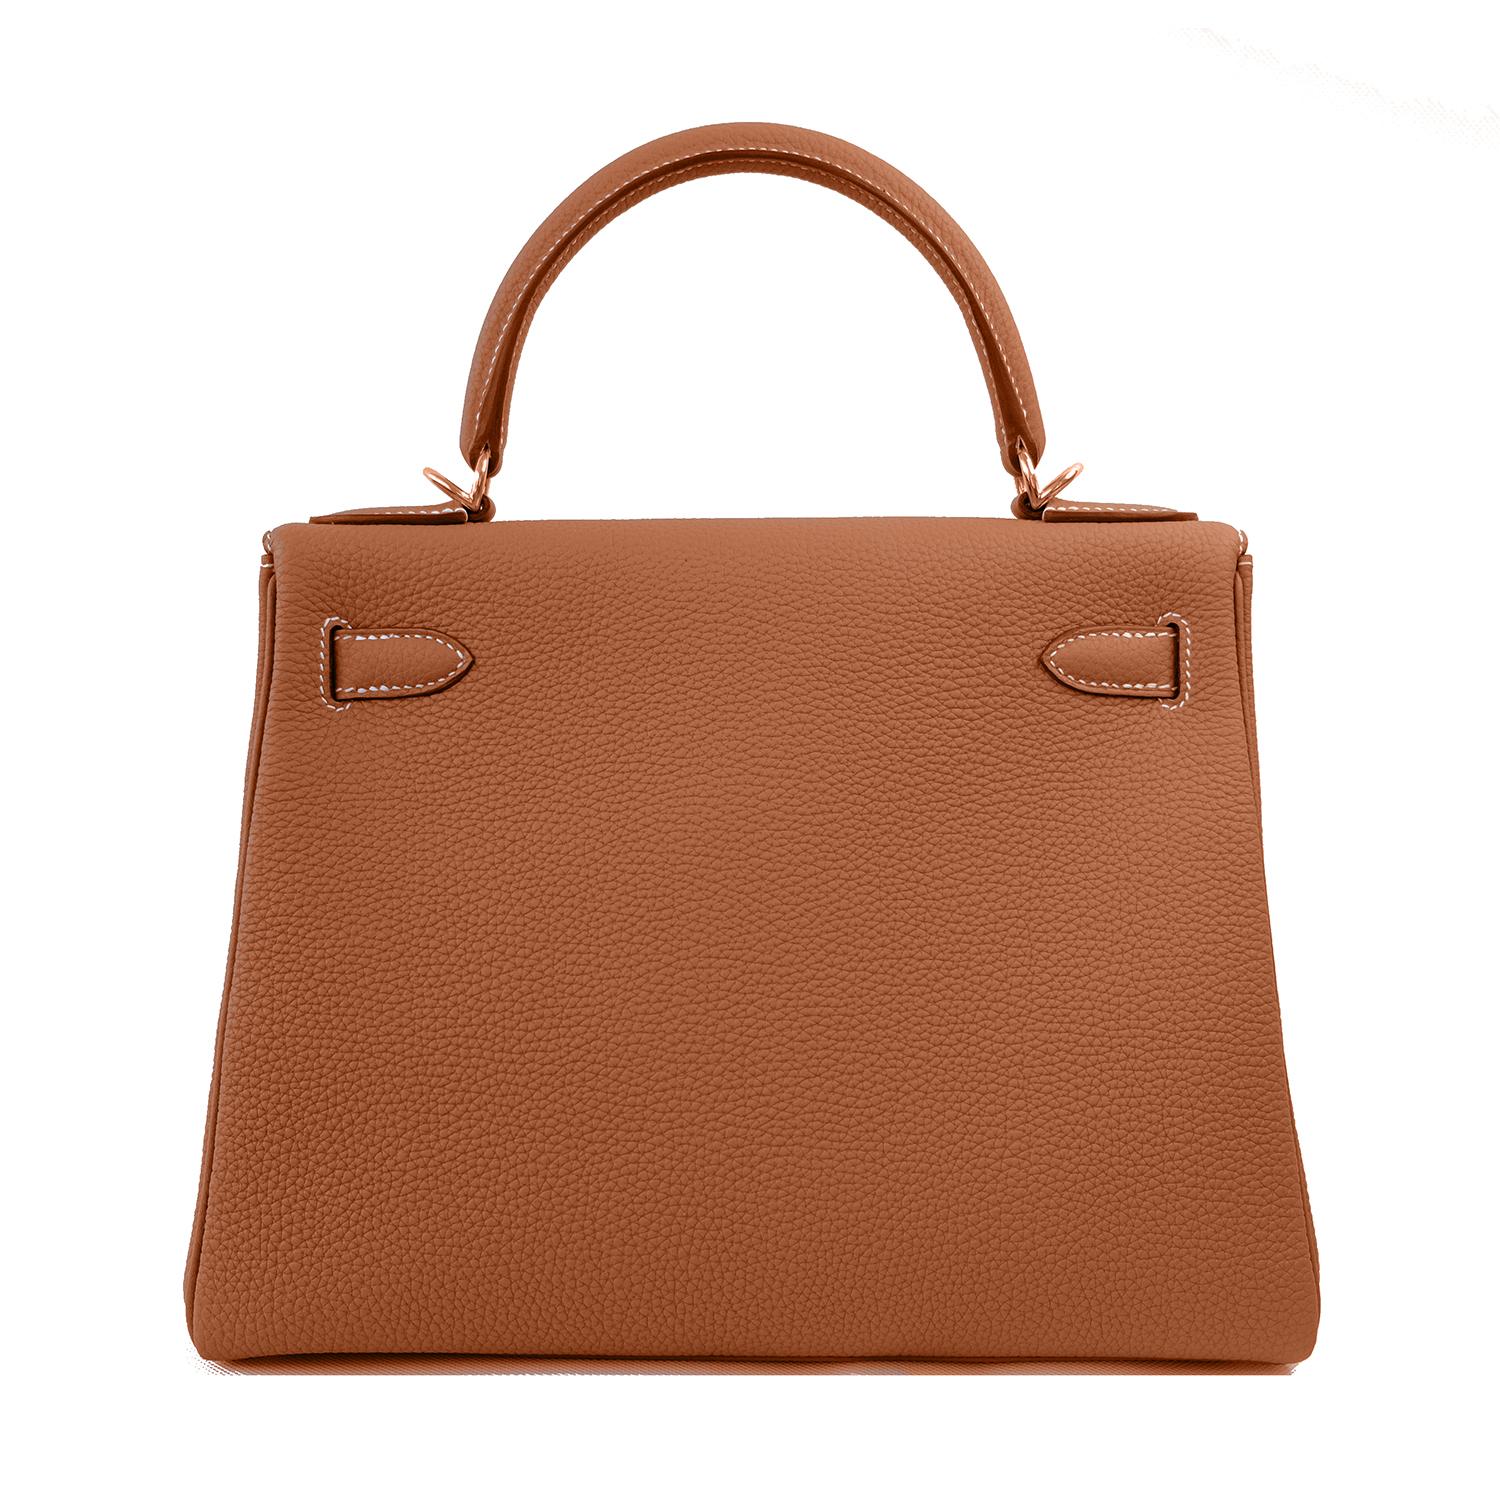 Hermes Gold Camel Tan 25cm Mini Kelly Bag Togo Retourne Gold Togo Y Stamp, 2020
Brand New in Box. Store Fresh. Pristine Condition (with plastic on hardware)
Just purchased from Hermes store; bag bears new 2020 interior Y Stamp.
Comes full set with